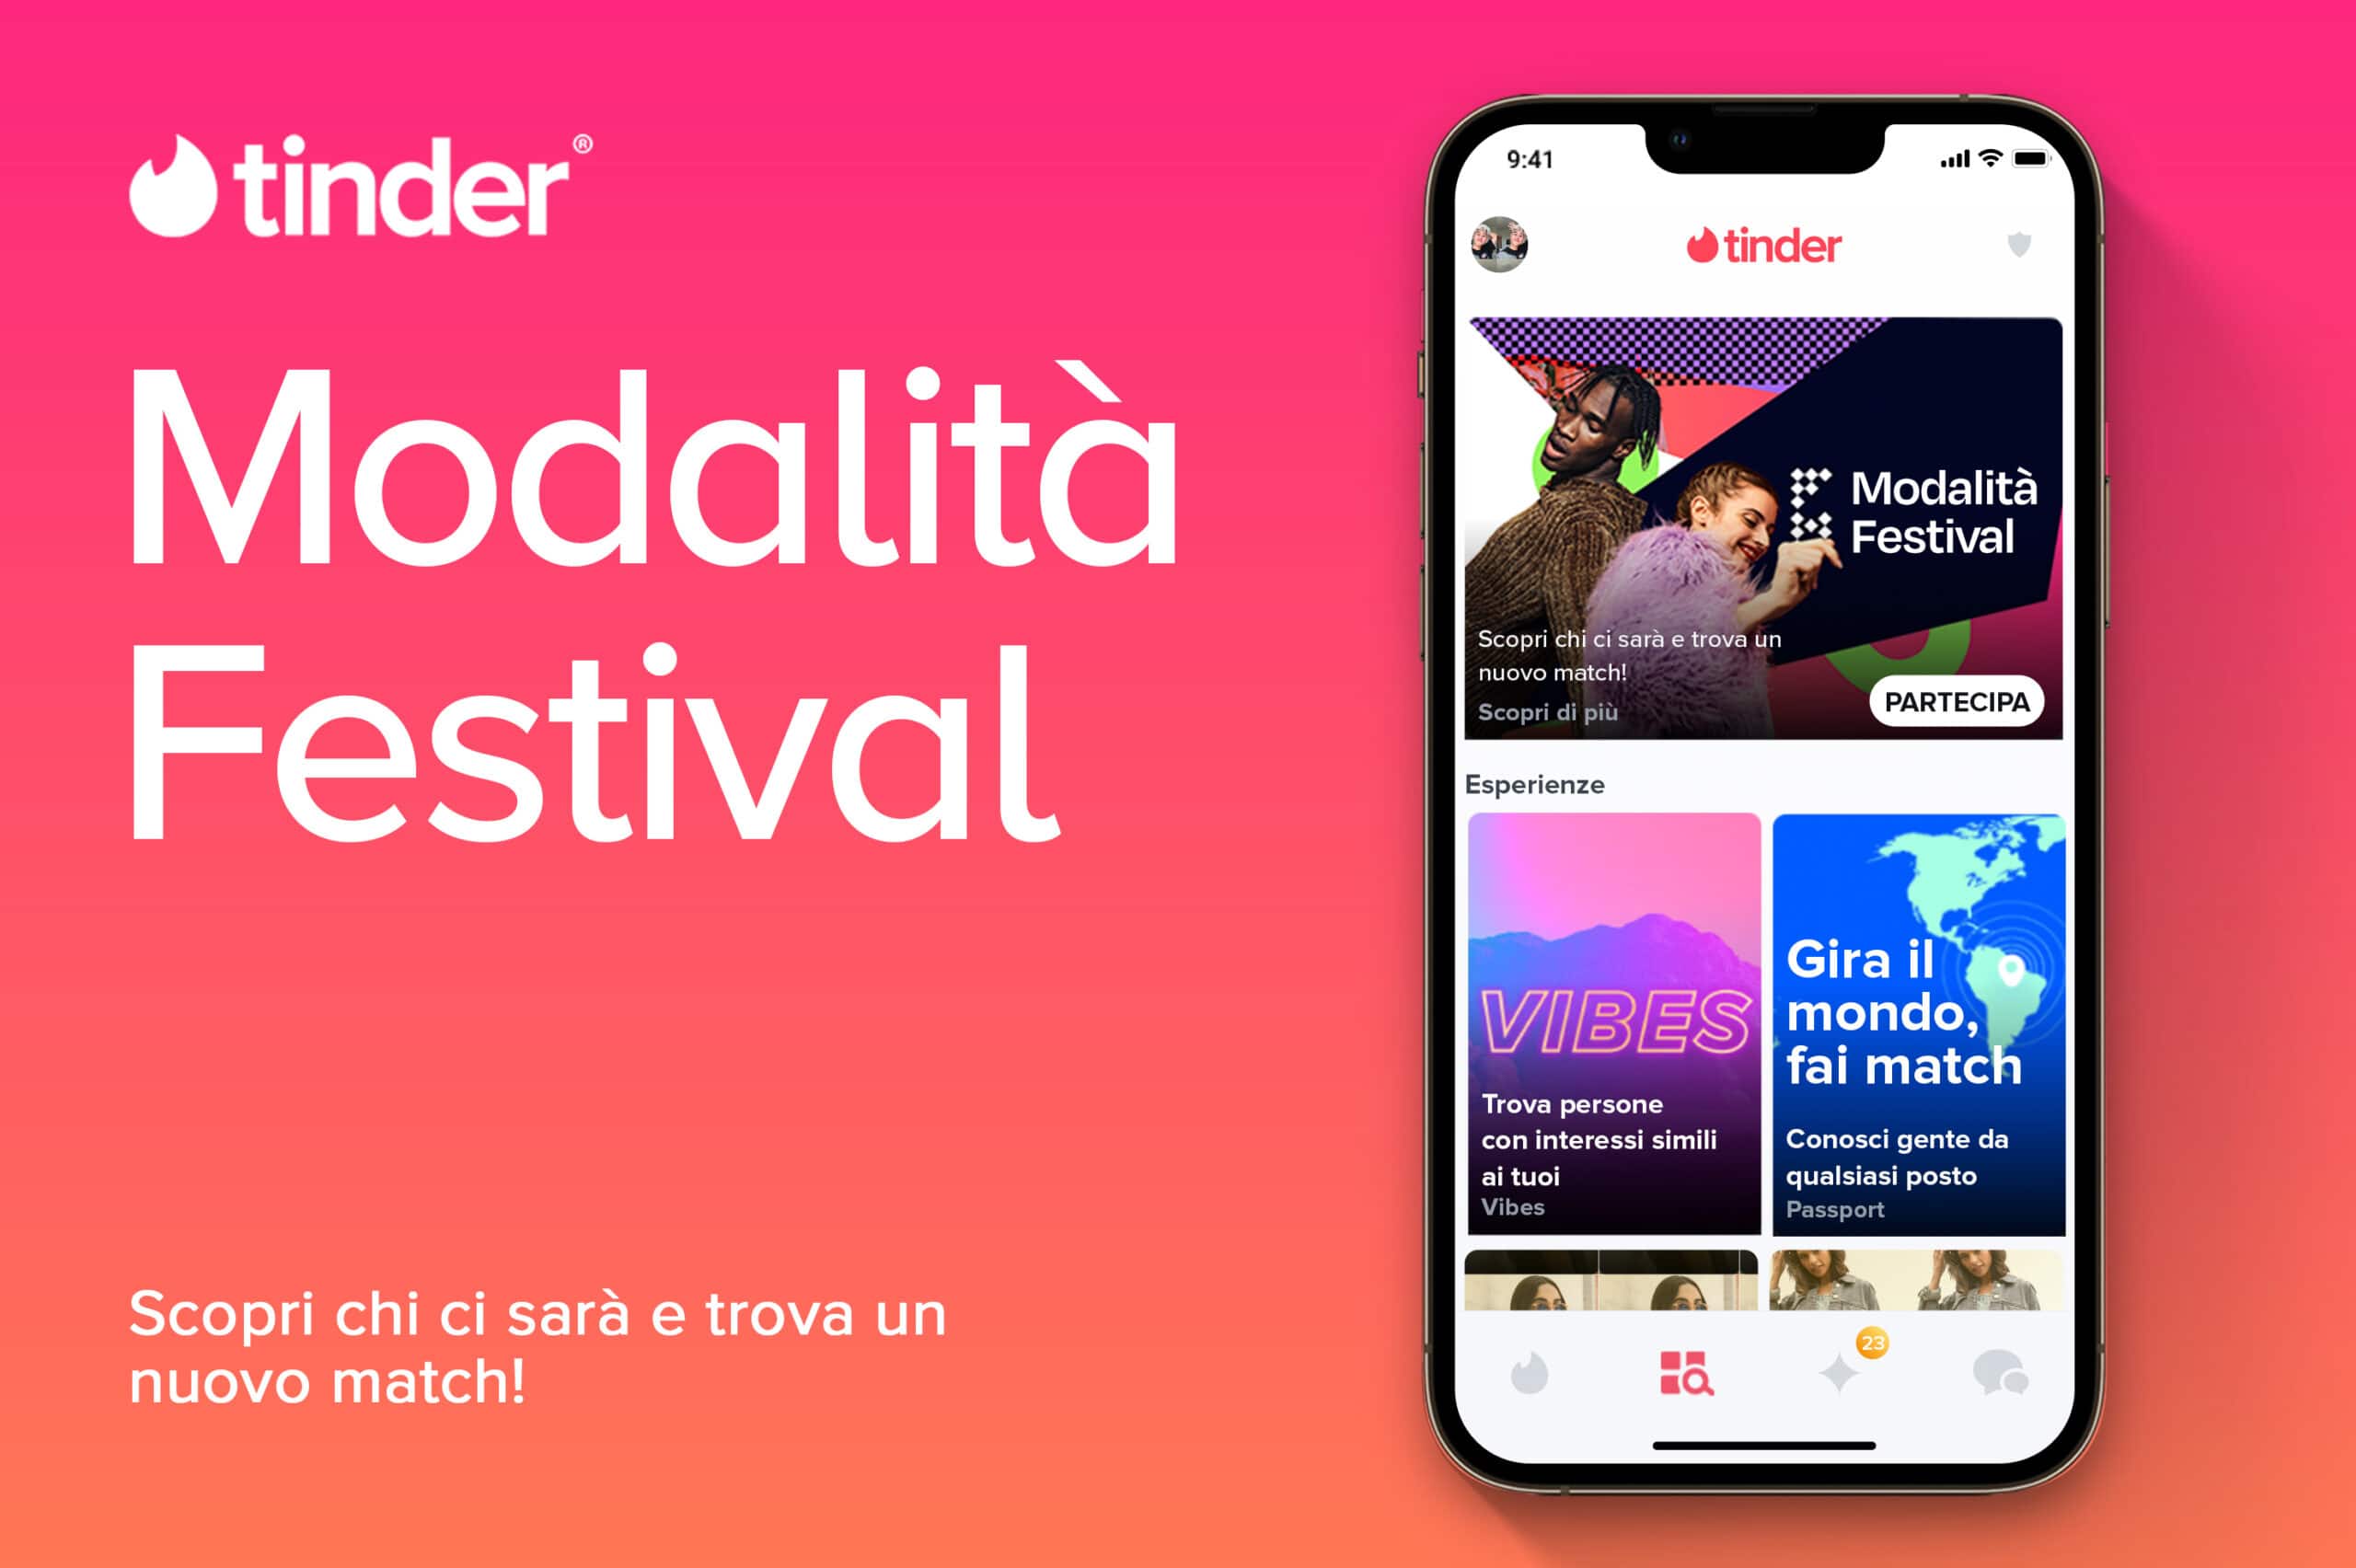 Dating and live music: Tinder launches festival style thumbnail